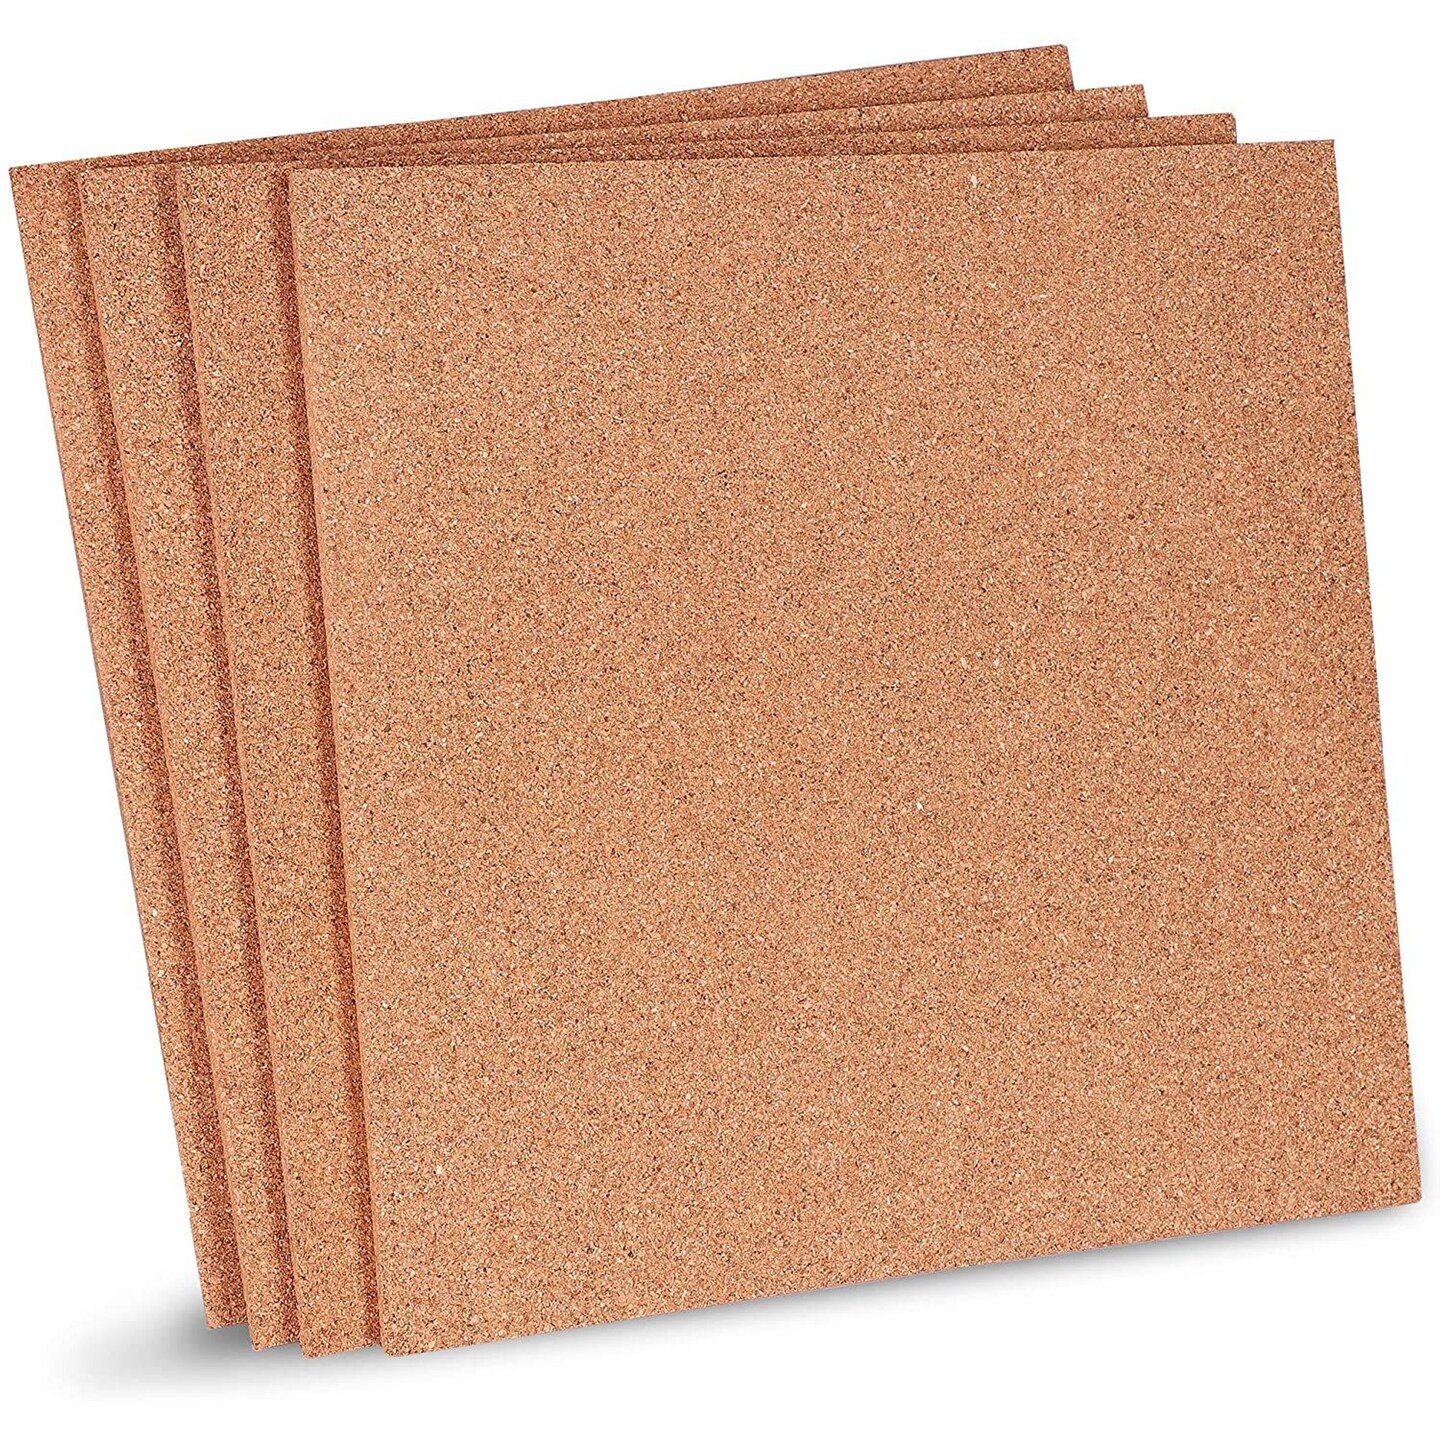 4-Pack Cork Board Tiles, 1/4-Inch Natural Square Cork board Tiles for  Bulletin Boards, Coasters, Countertop Pot and Pan Holders, and DIY Arts and